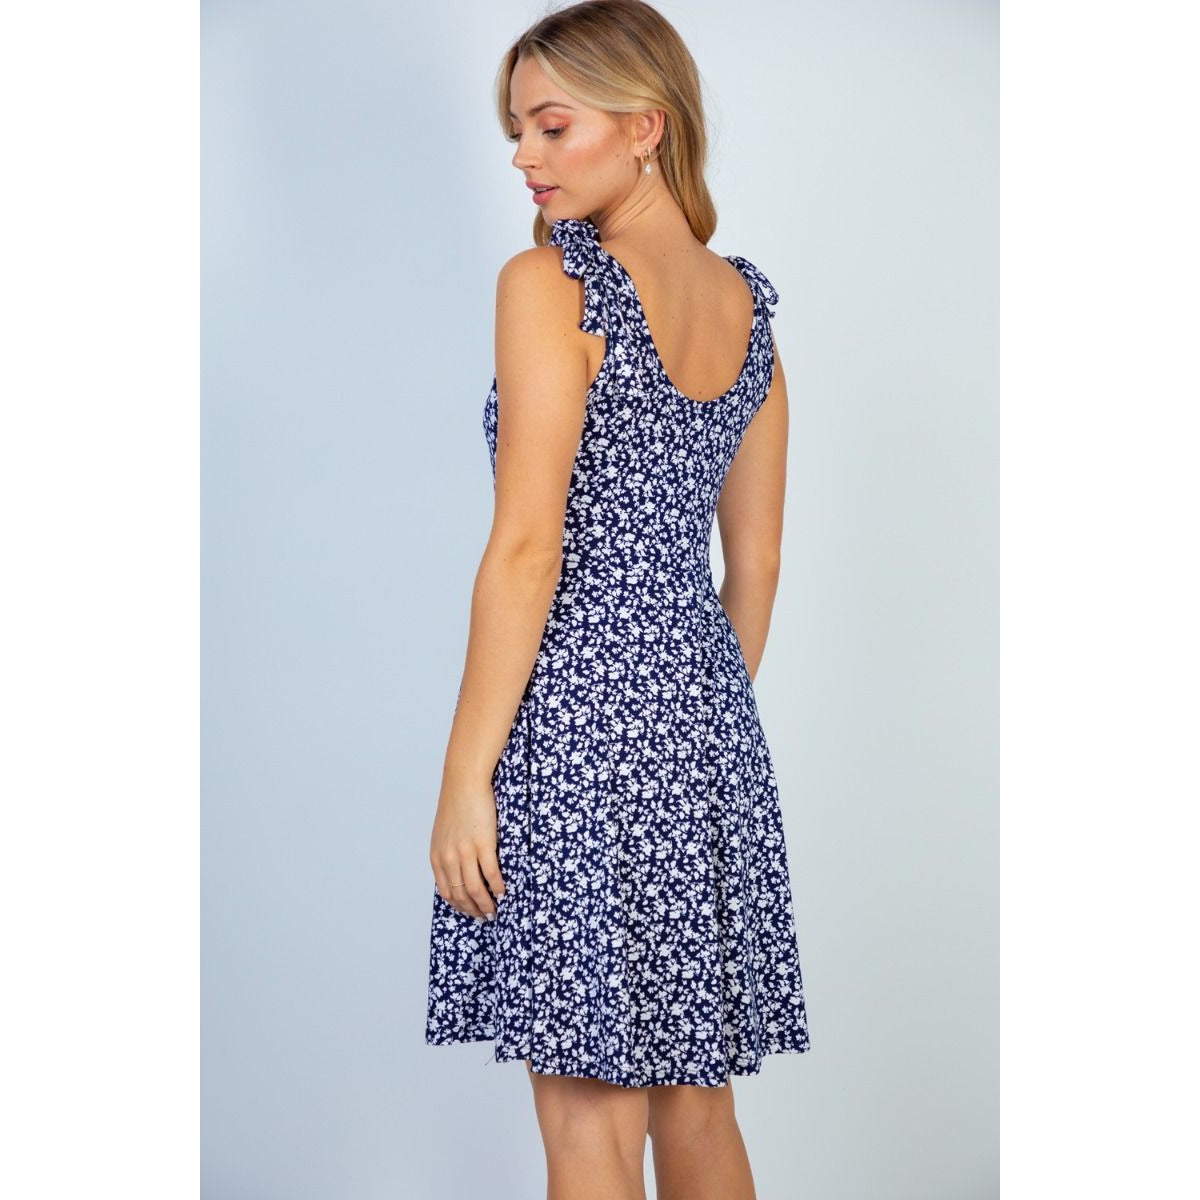 Eleni Blue and White Floral Dress - Rhapsody and Renascence